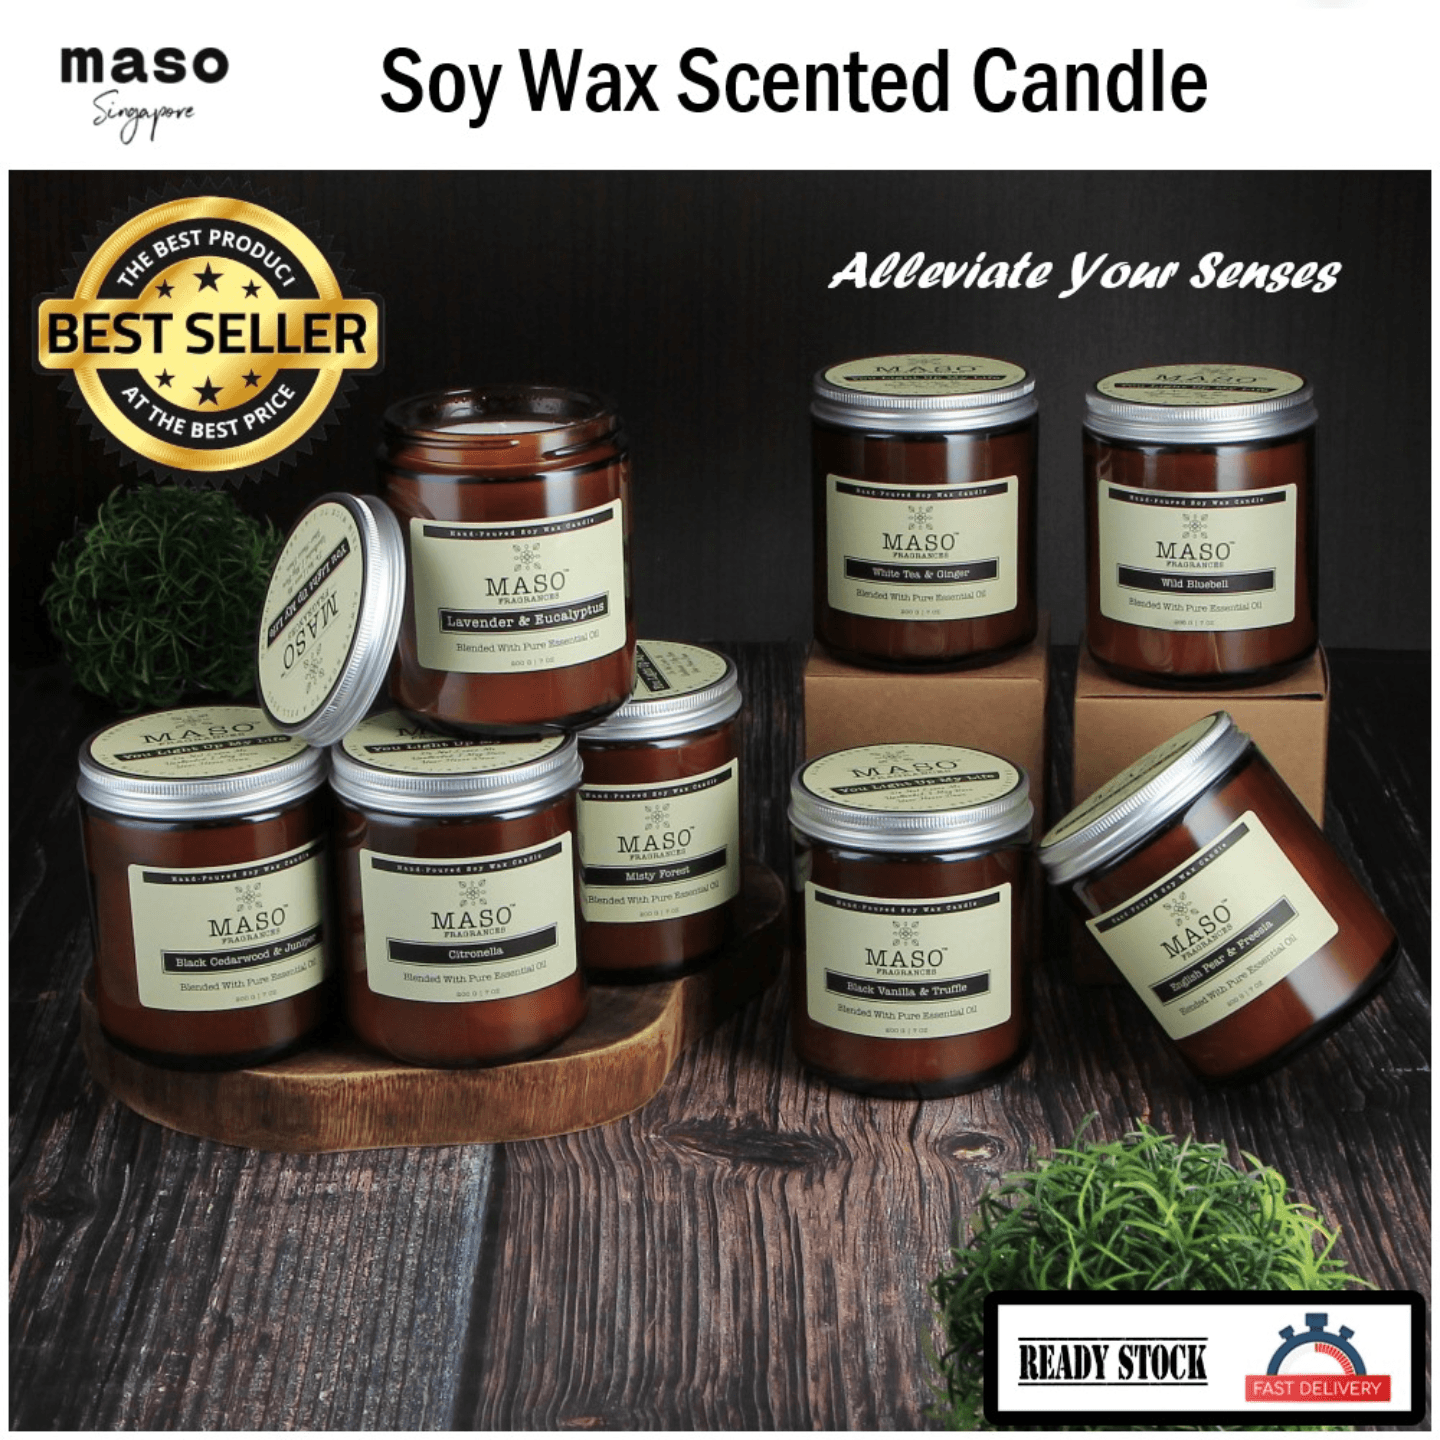 Soy Wax Scented Candles 200g- Aroma Essential Oil  Natural Soy Wax  Smokeless  Luxurious Jar  Hand Made Home Fragrance by MASO Best Selling Scented Candle